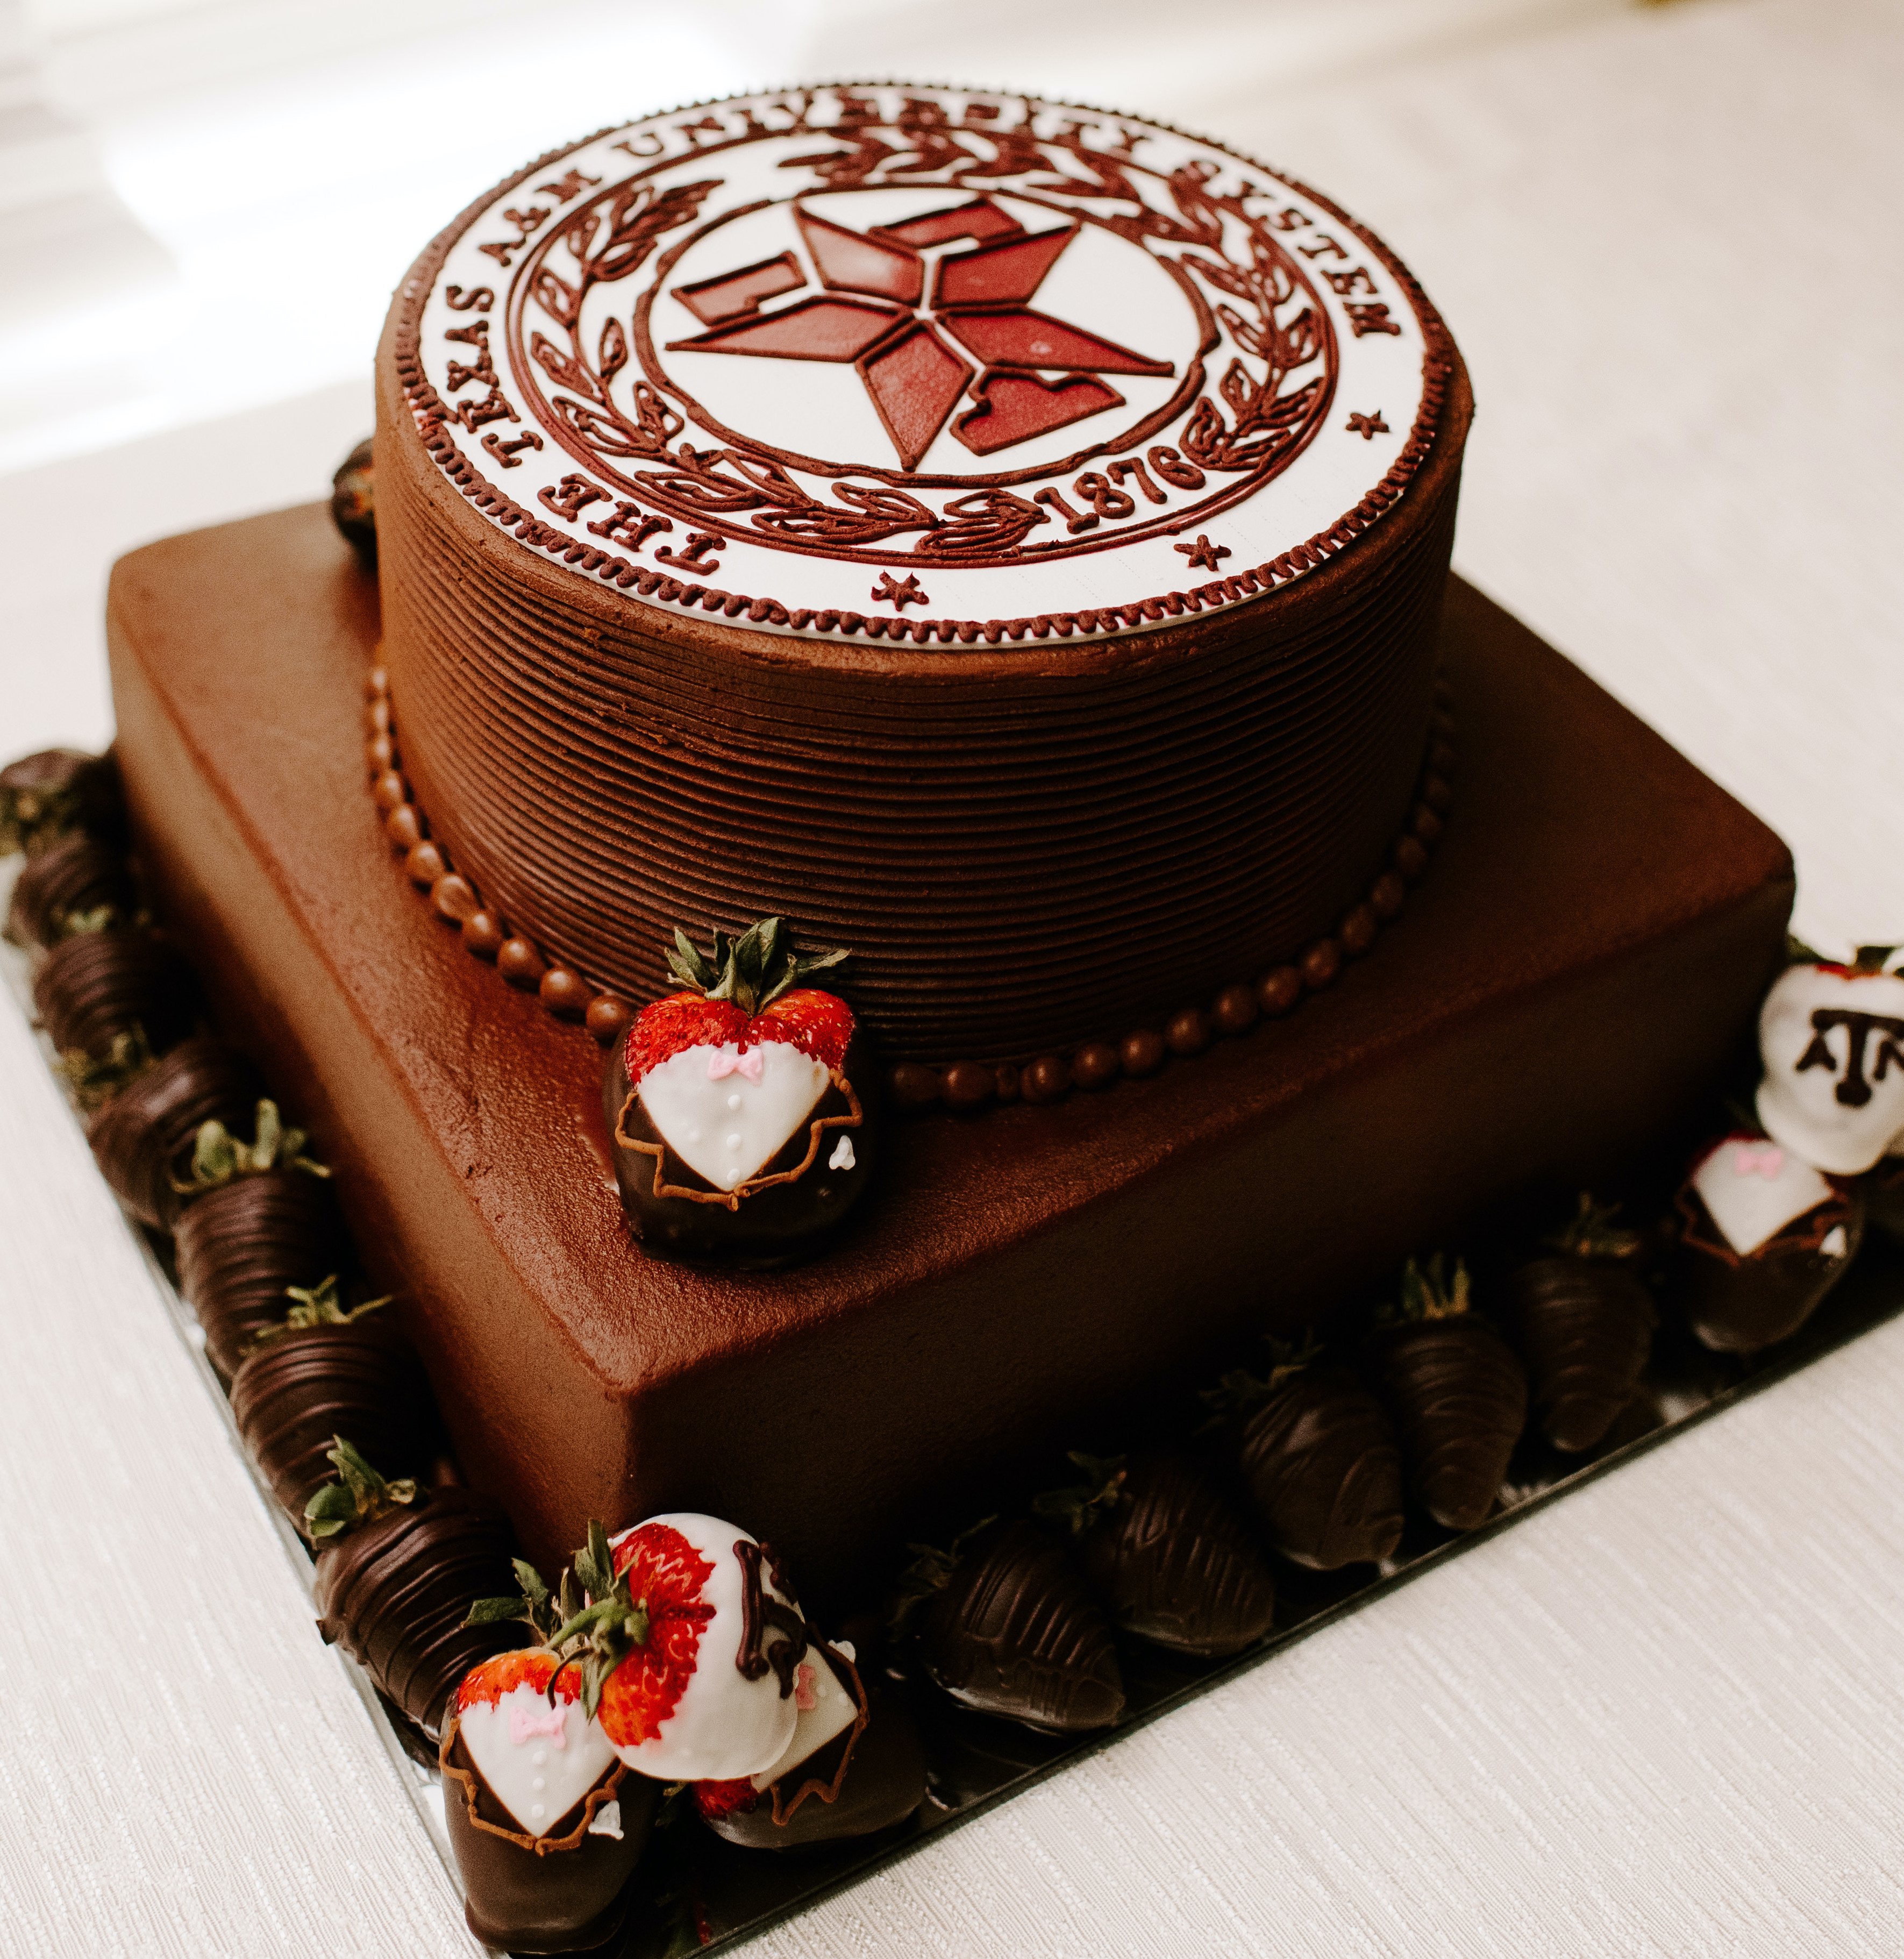 A chocolate cake with the Texas A&M seal on it.